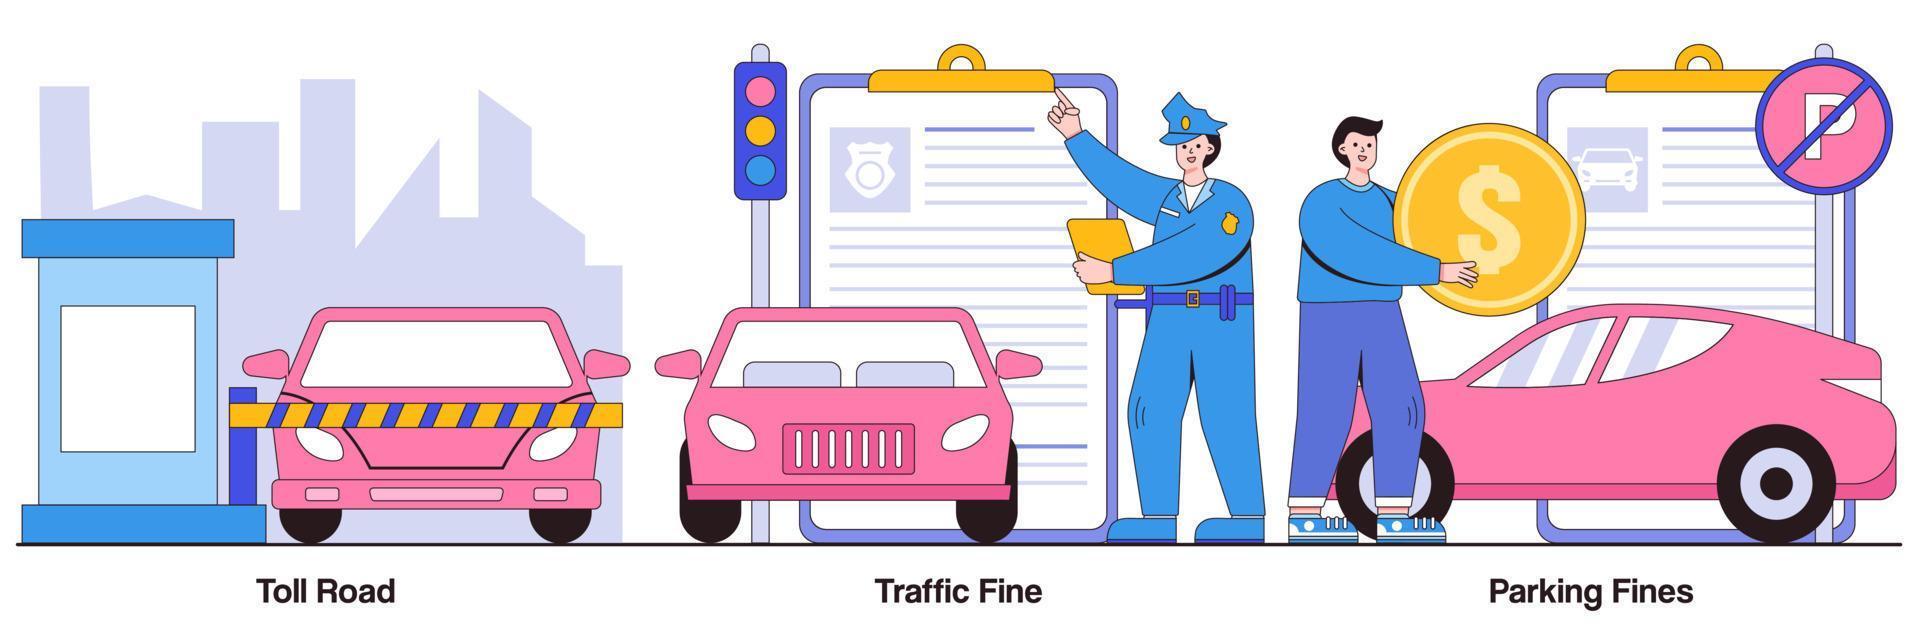 Toll Road, Traffic and Parking Fine Illustrated Pack vector